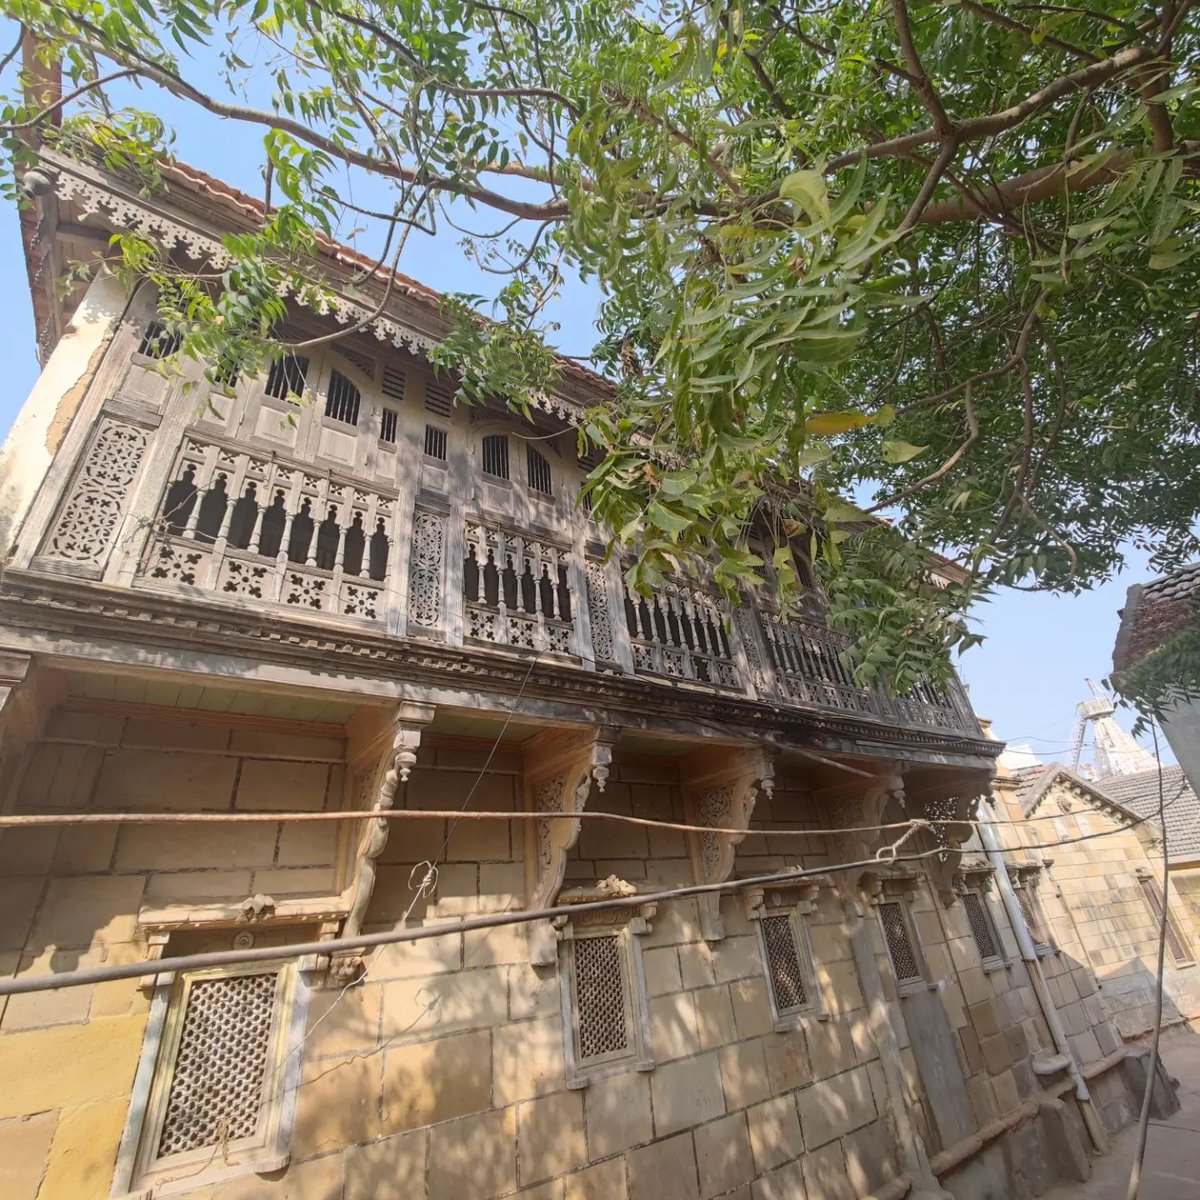 Old Heritage Houses in an ancient Village in Kutch
Come & Film here in Kutch Gujarat
Call Kishore Sinh Parmar ( 9898279640 & 7485949640 )
gujaratlocations@gmail.com
#HeritageVillage
#HeritageLocationsGujarat
#HeritageFilmLocations
#HeritageArchitecture
#Architecture